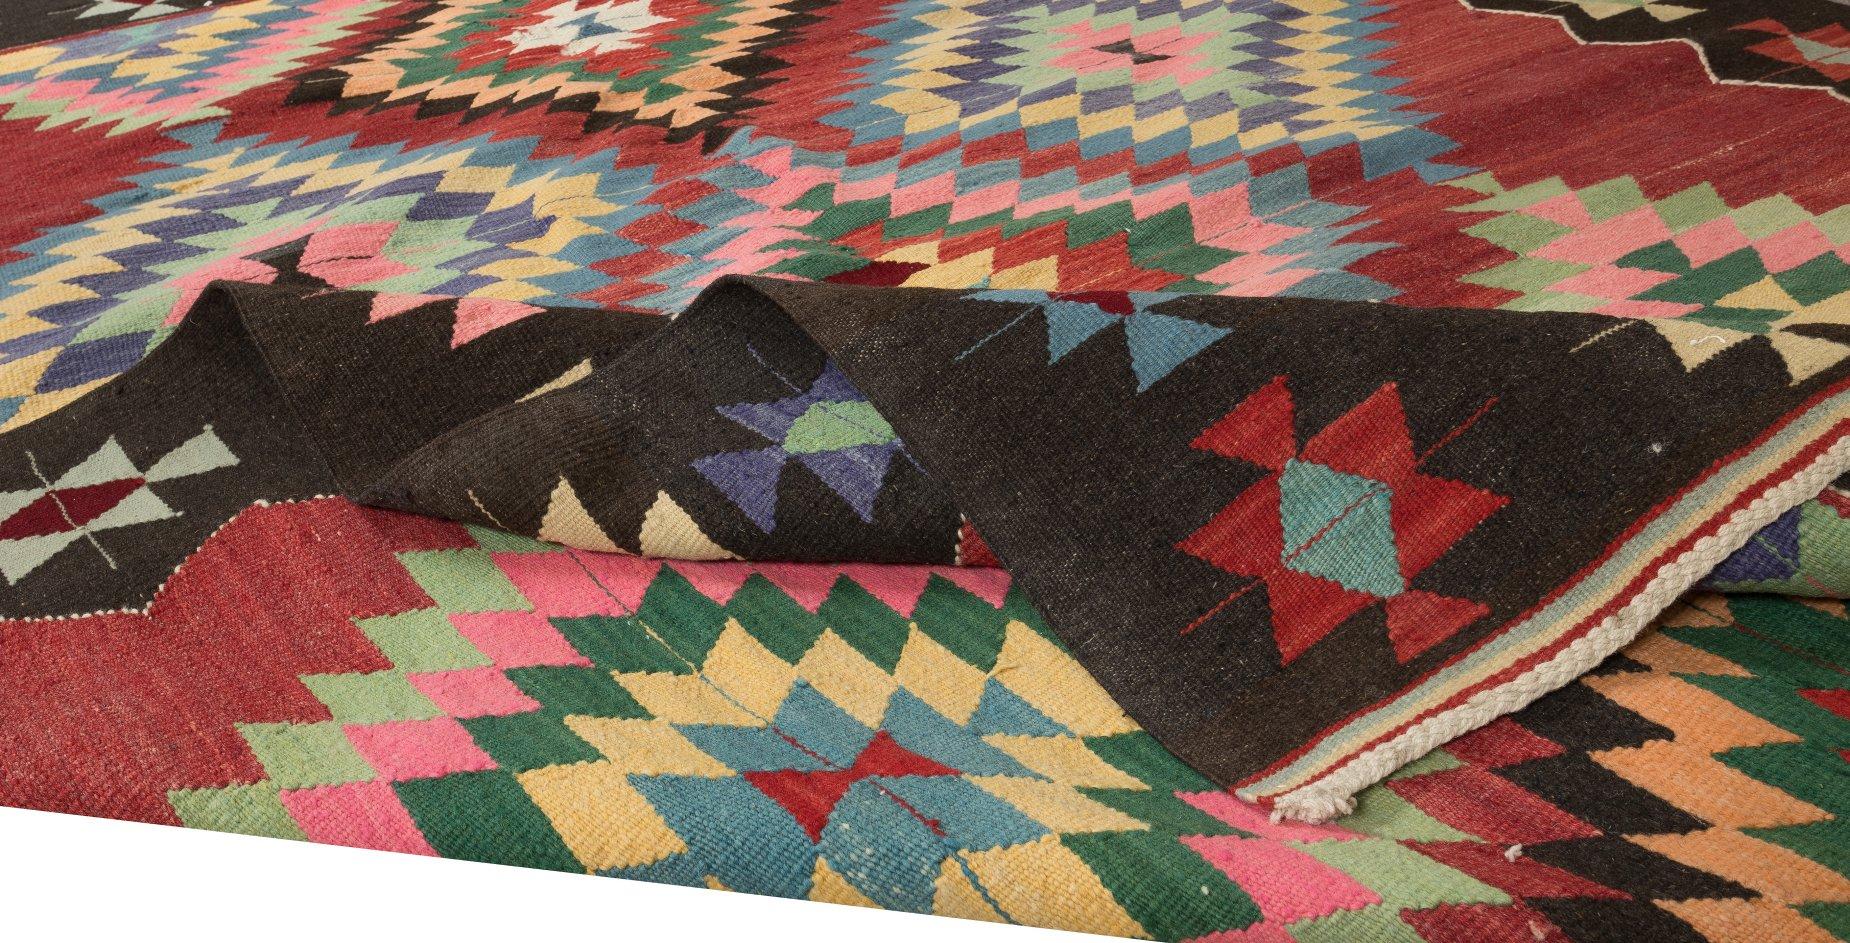 Hand-Woven 6x8.7 Ft Colorful HandWoven Vintage Turkish Wool Kilim Rug with Geometric Design For Sale